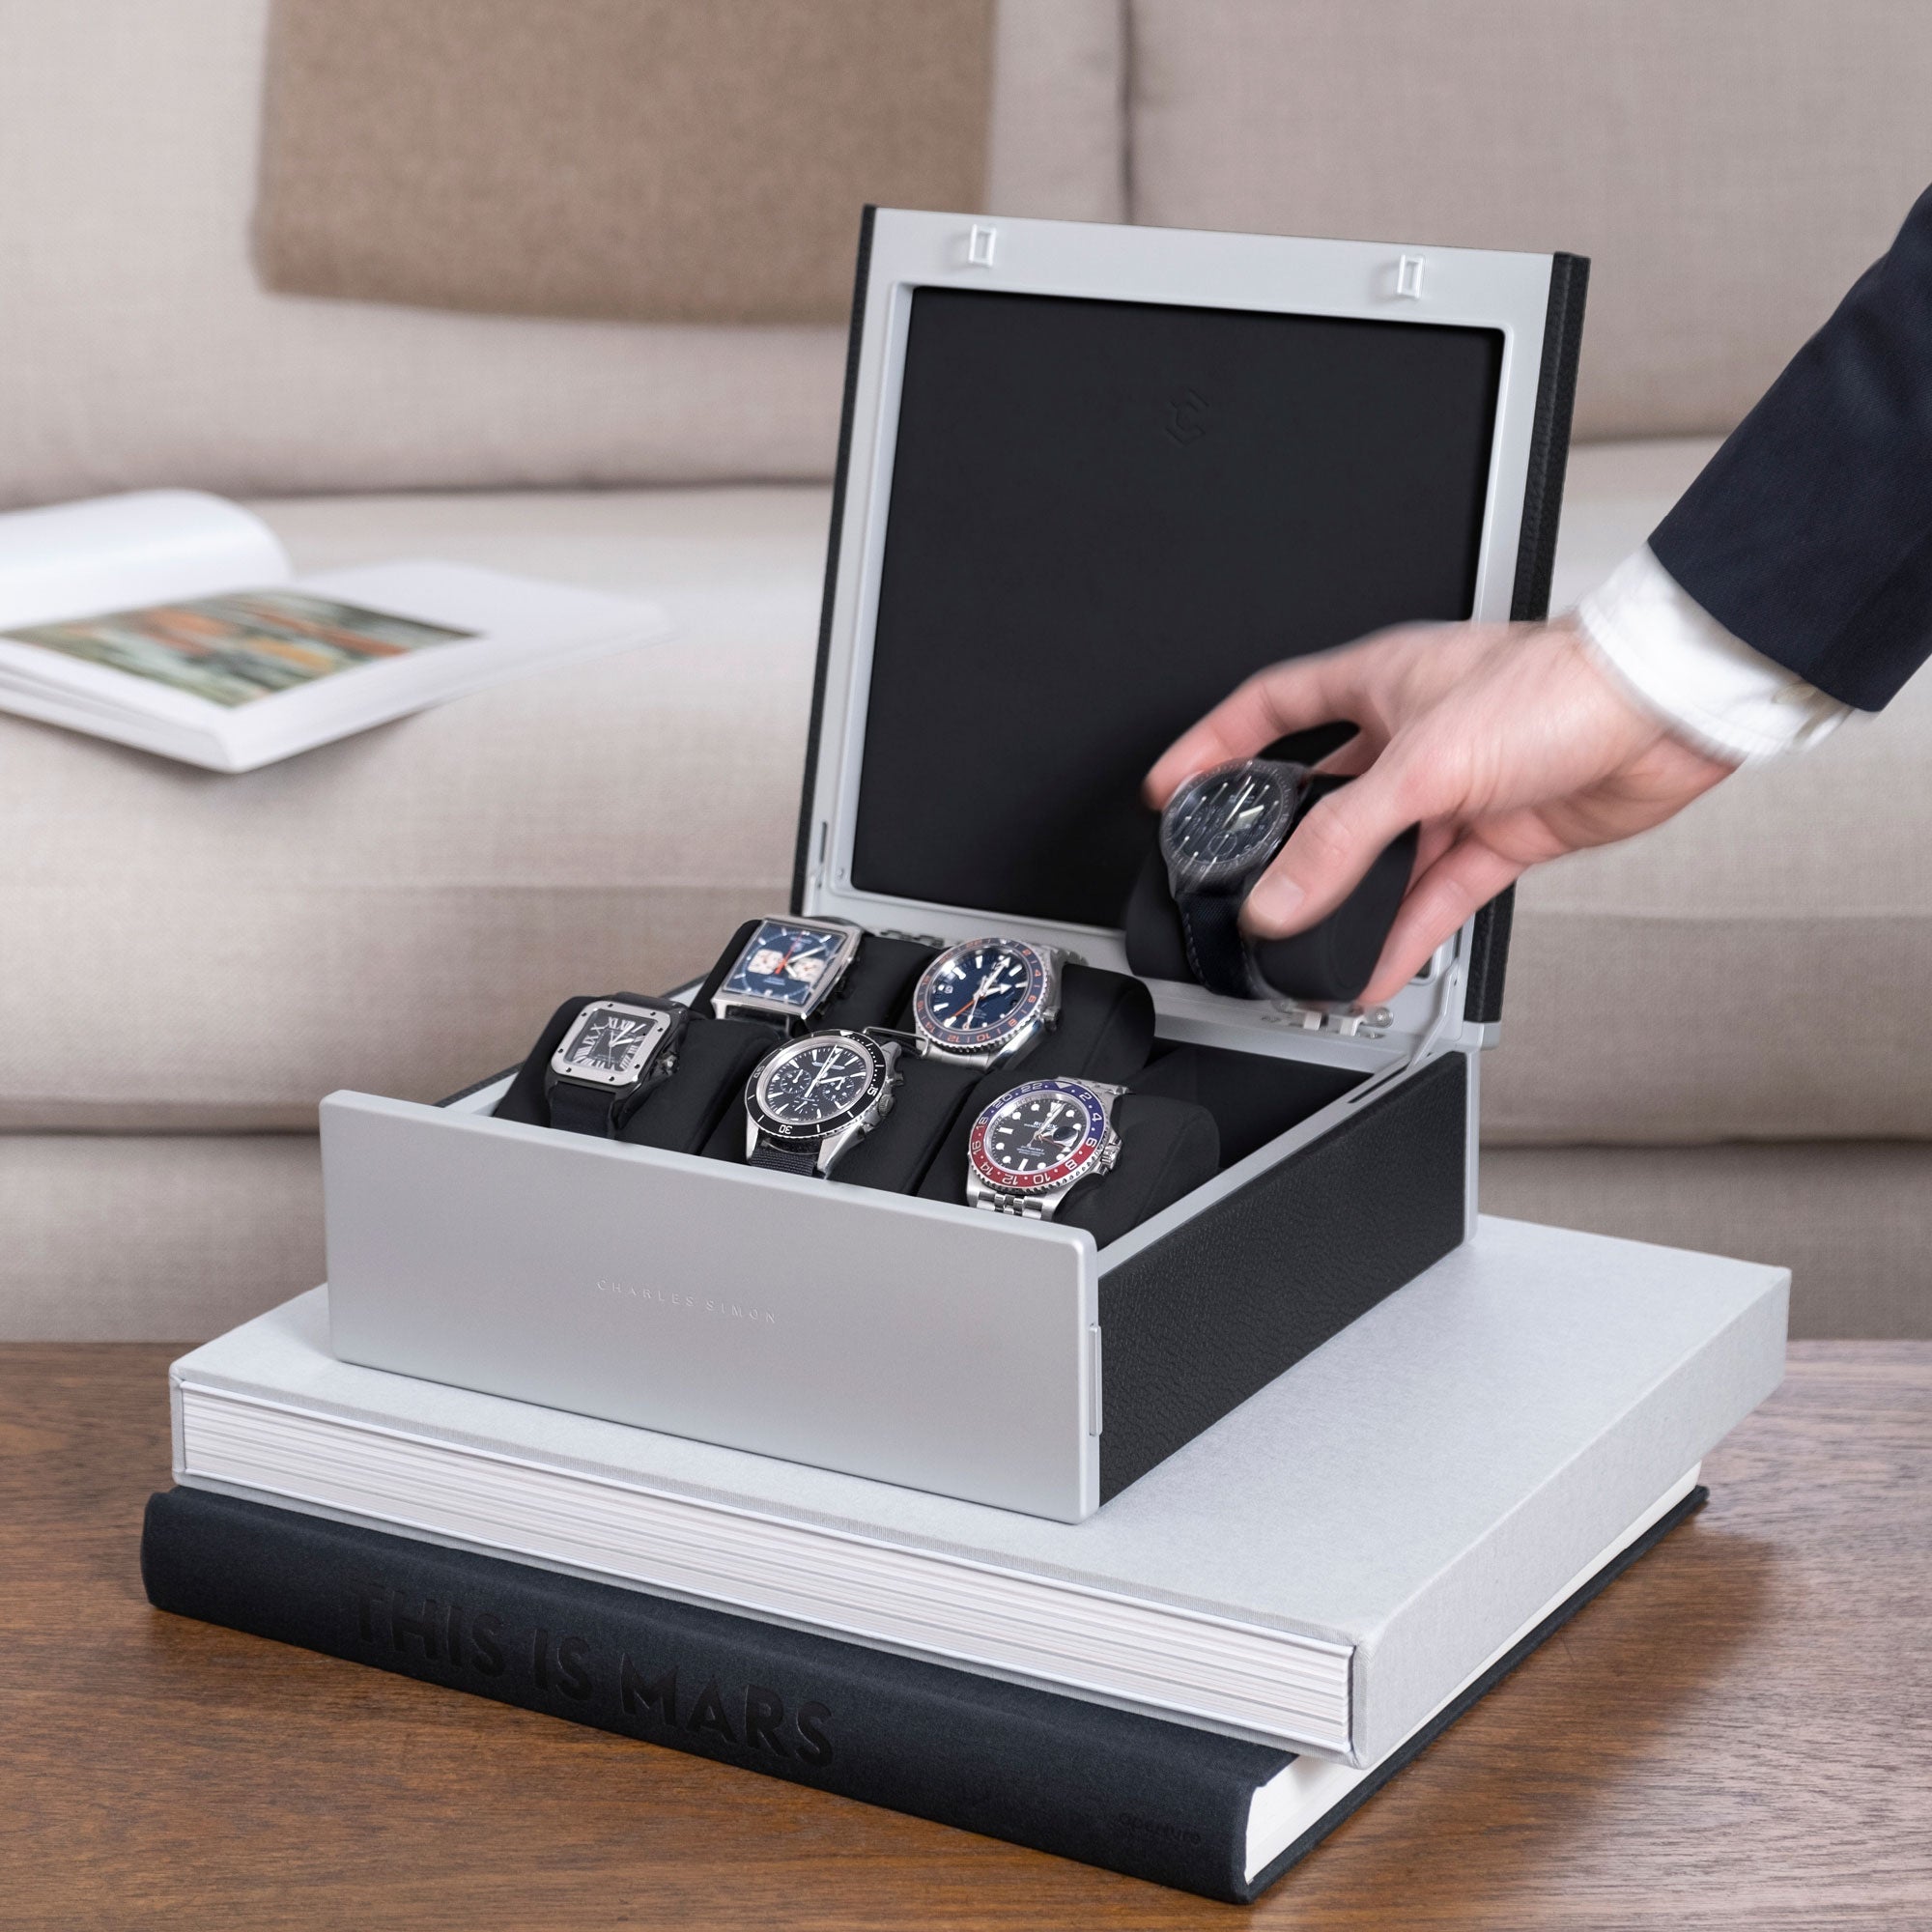 Lifestyle shot of black Spence watch box holding 6 luxury men's watches includng Rolex, Omega, Cartier, Jaeger Lecoultre. Business man is taking watch placed on black Alcantara cushion from watch box